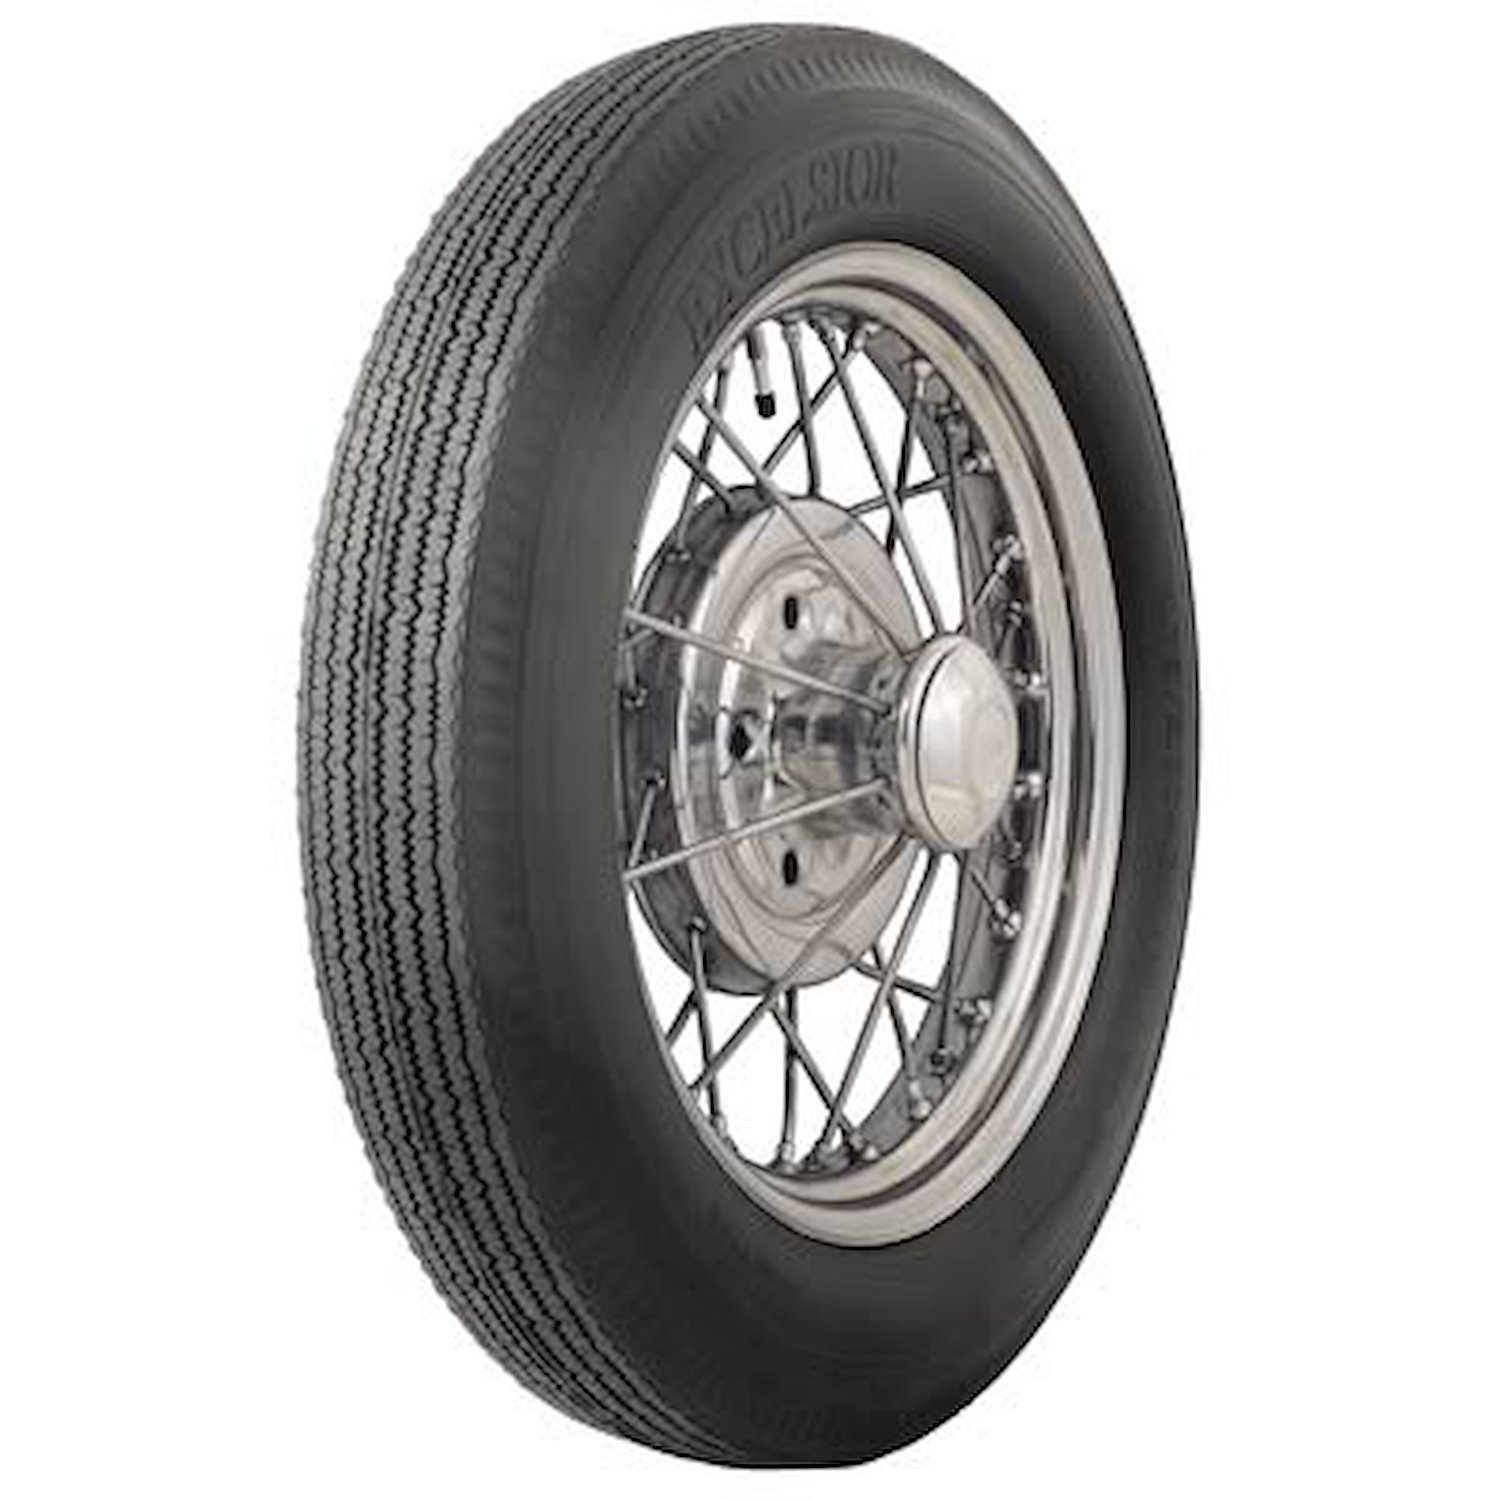 69948 Tire, Excelsior, 475/500-18